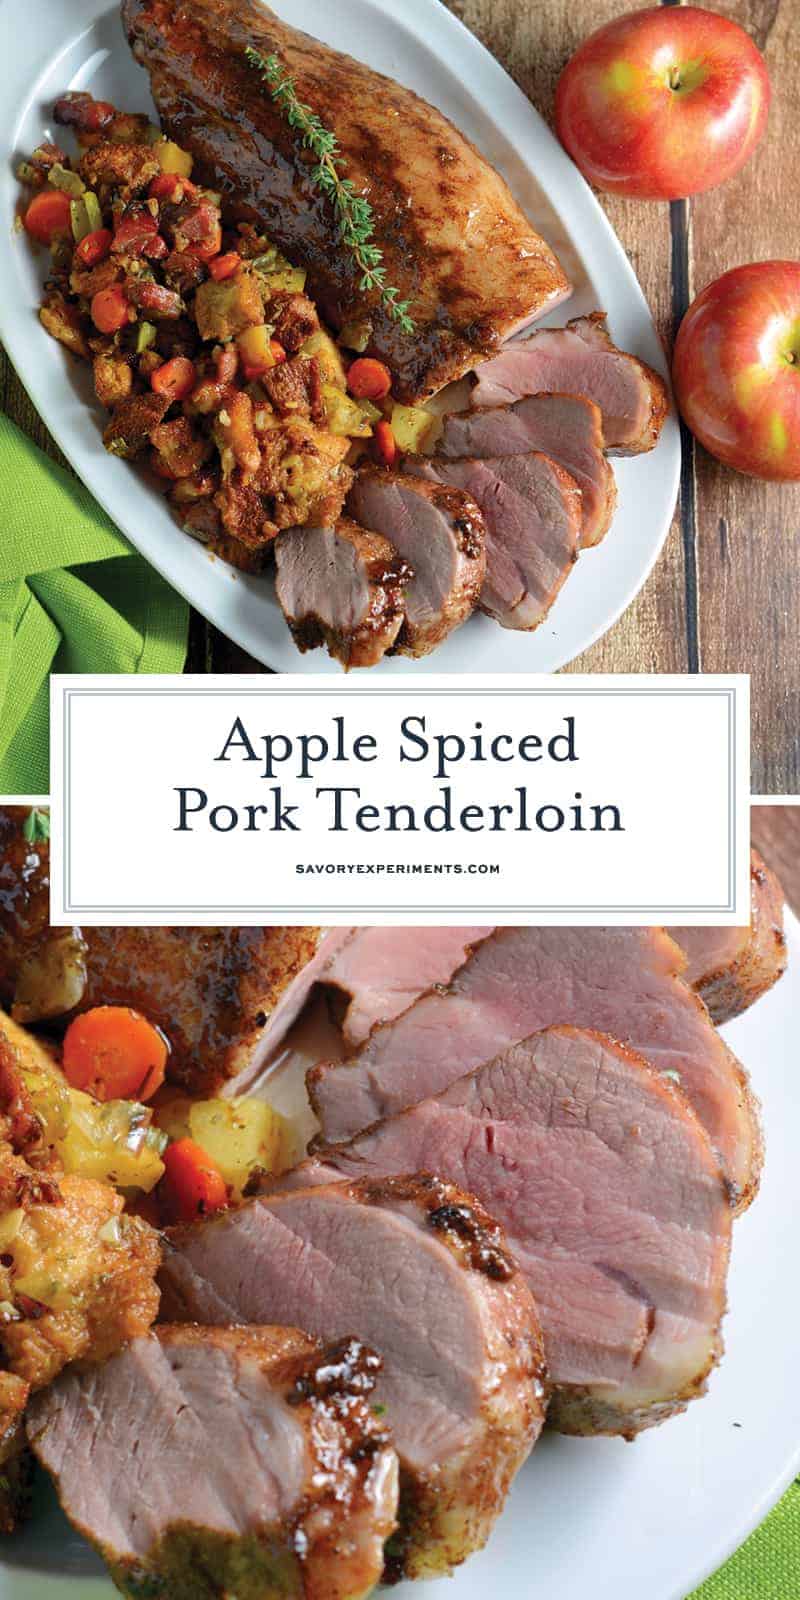 Apple Spiced Pork Tenderloin is a pork tenderloin recipe  that will blow you away with aromatic spices and an apple jelly glaze, surrounding with fresh apple and ham stuffing, all cooked on the same baking sheet. #porktenderloinrecipe www.savoryexperiments.com 